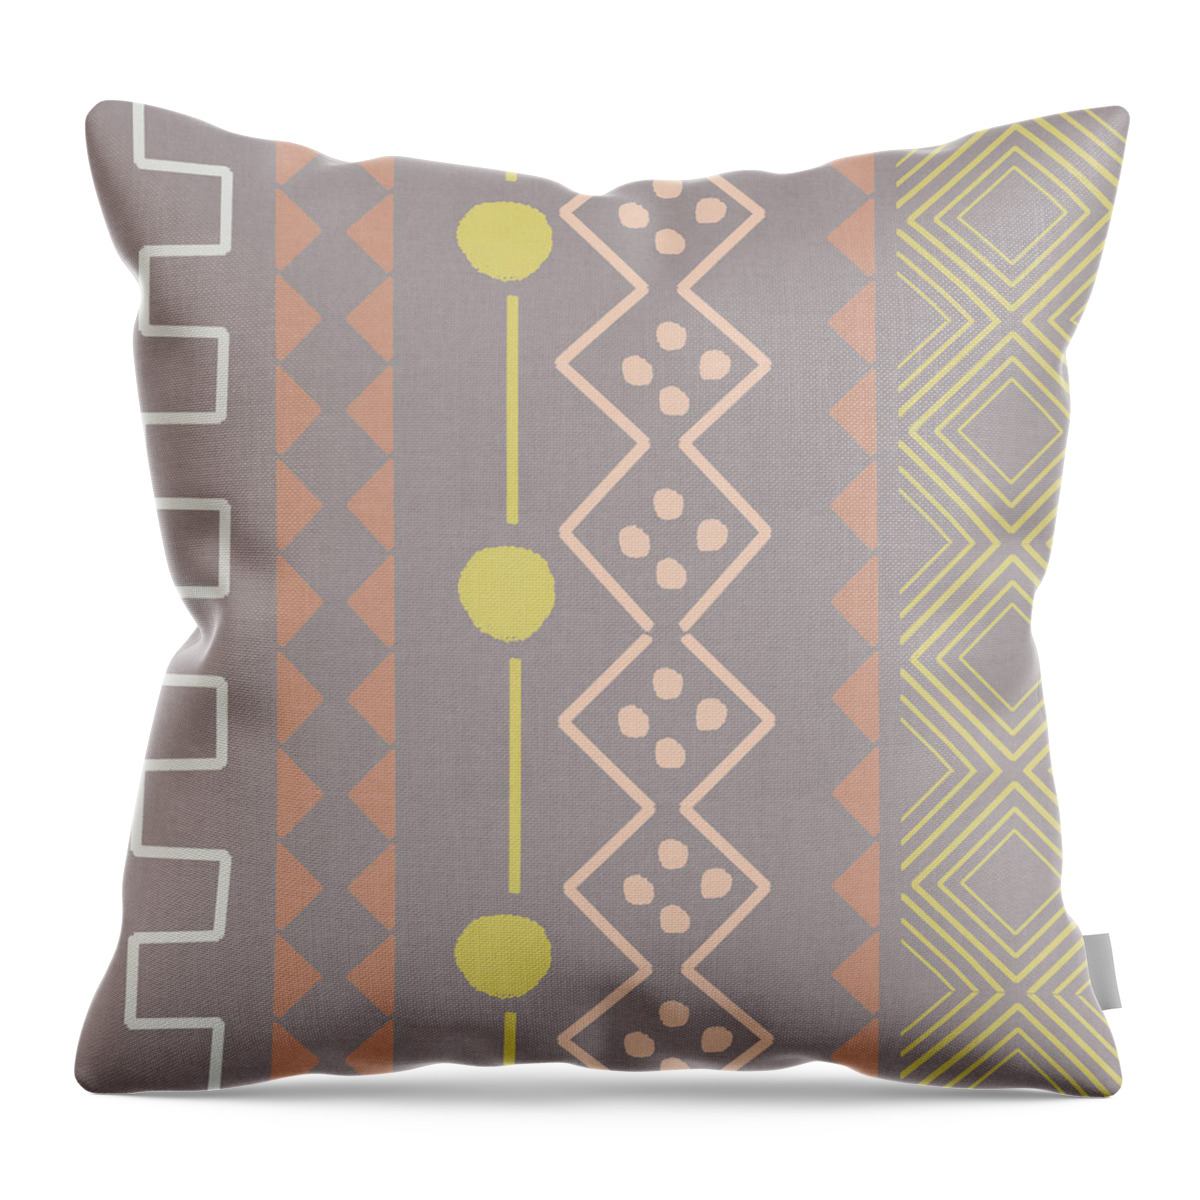  Diamonds Throw Pillow featuring the mixed media Southwest Decorative Design 7- Art by Linda Woods by Linda Woods